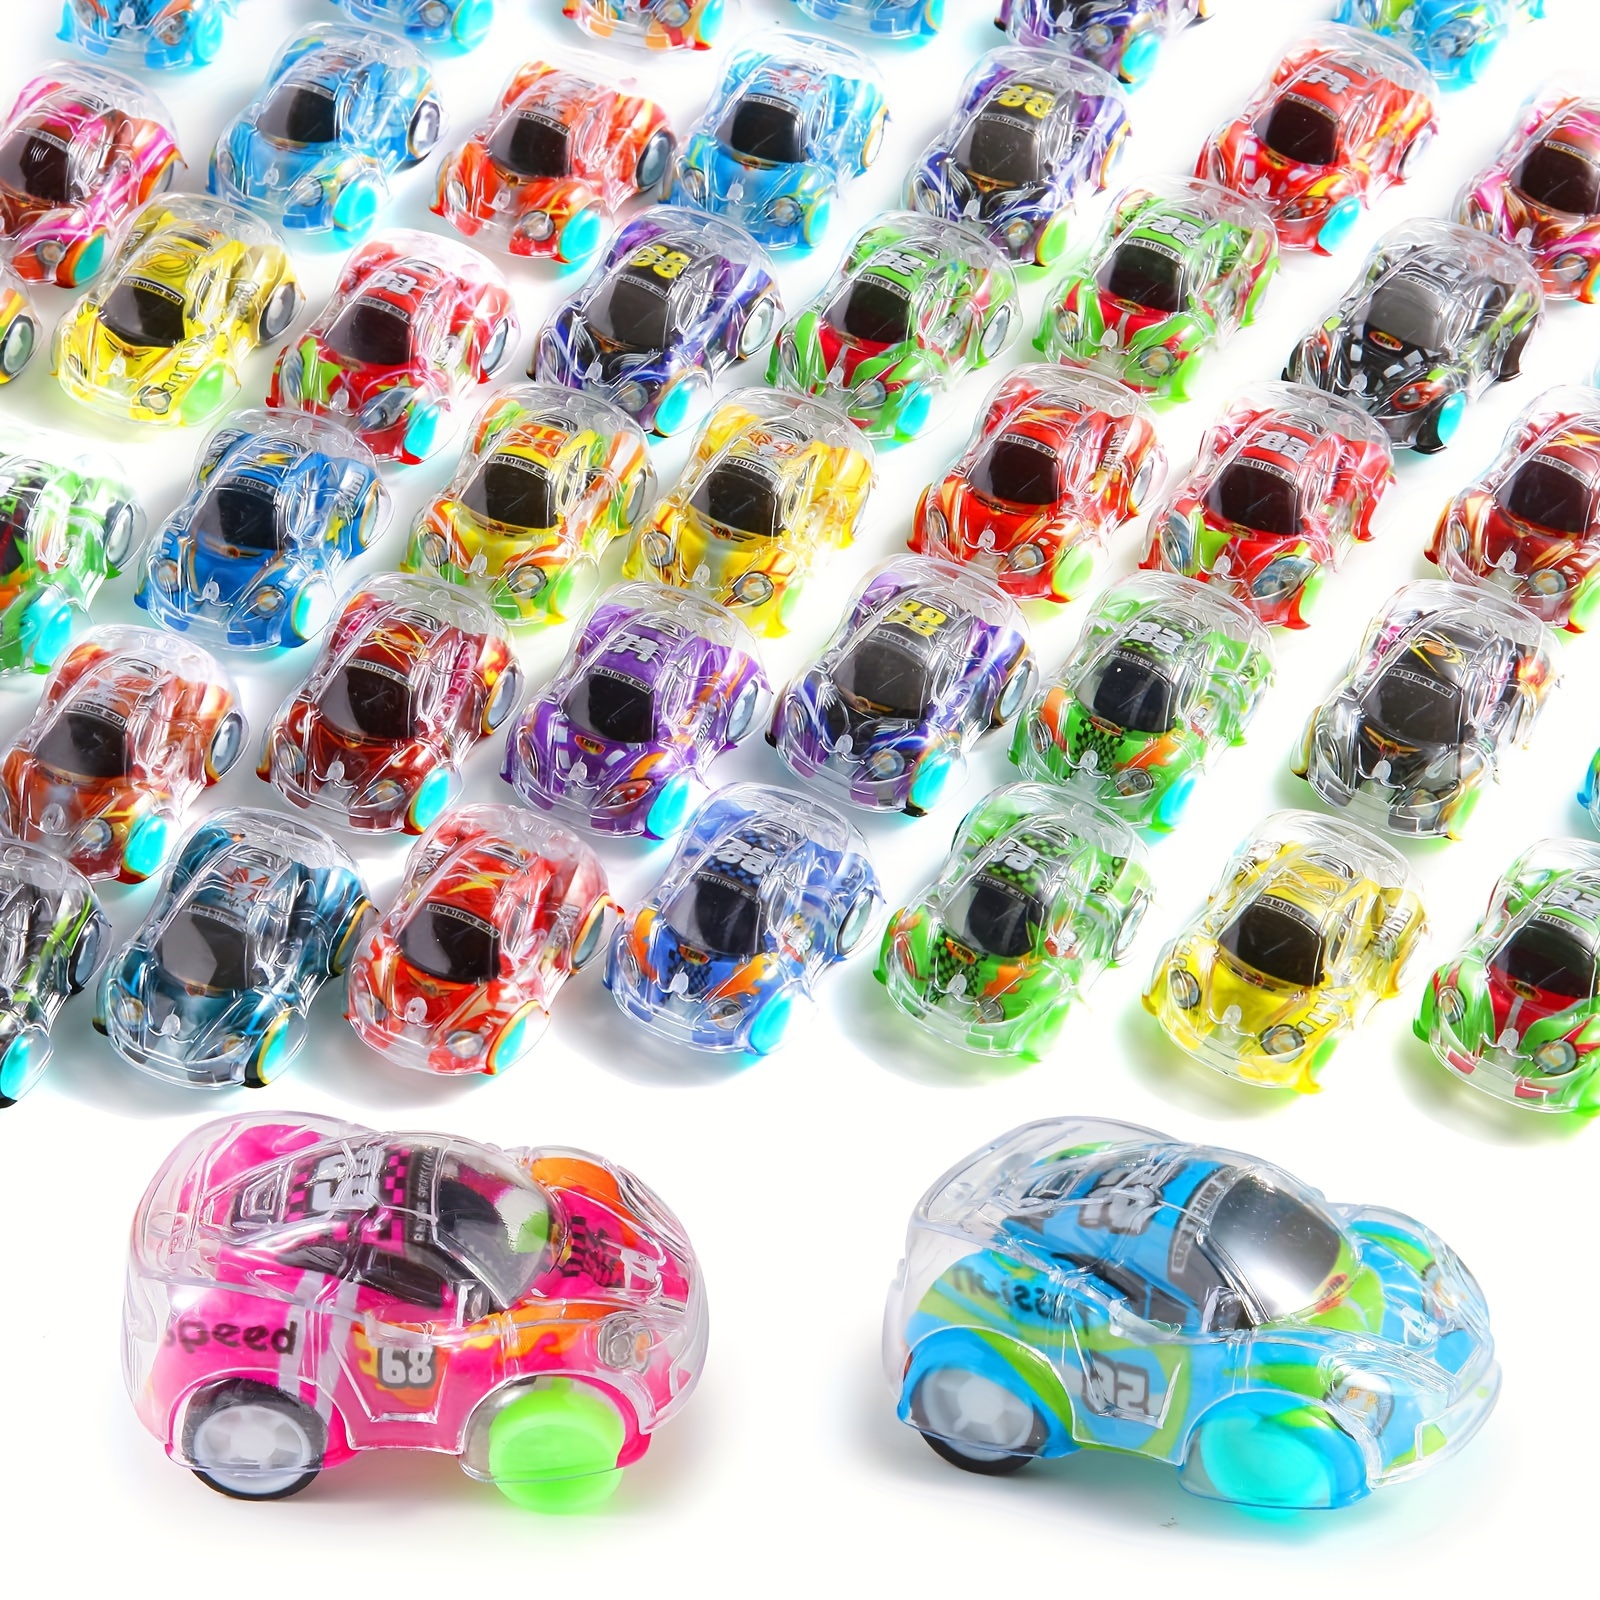 

24/36/48pcs, Random Mini Pull Back Cars Set, Pull Back Racing Vehicles For Kids Toddlers, Party Favors, Classroom Prizes, Pinata Fillers, Goodie Bag Stuffers For Boys Girls